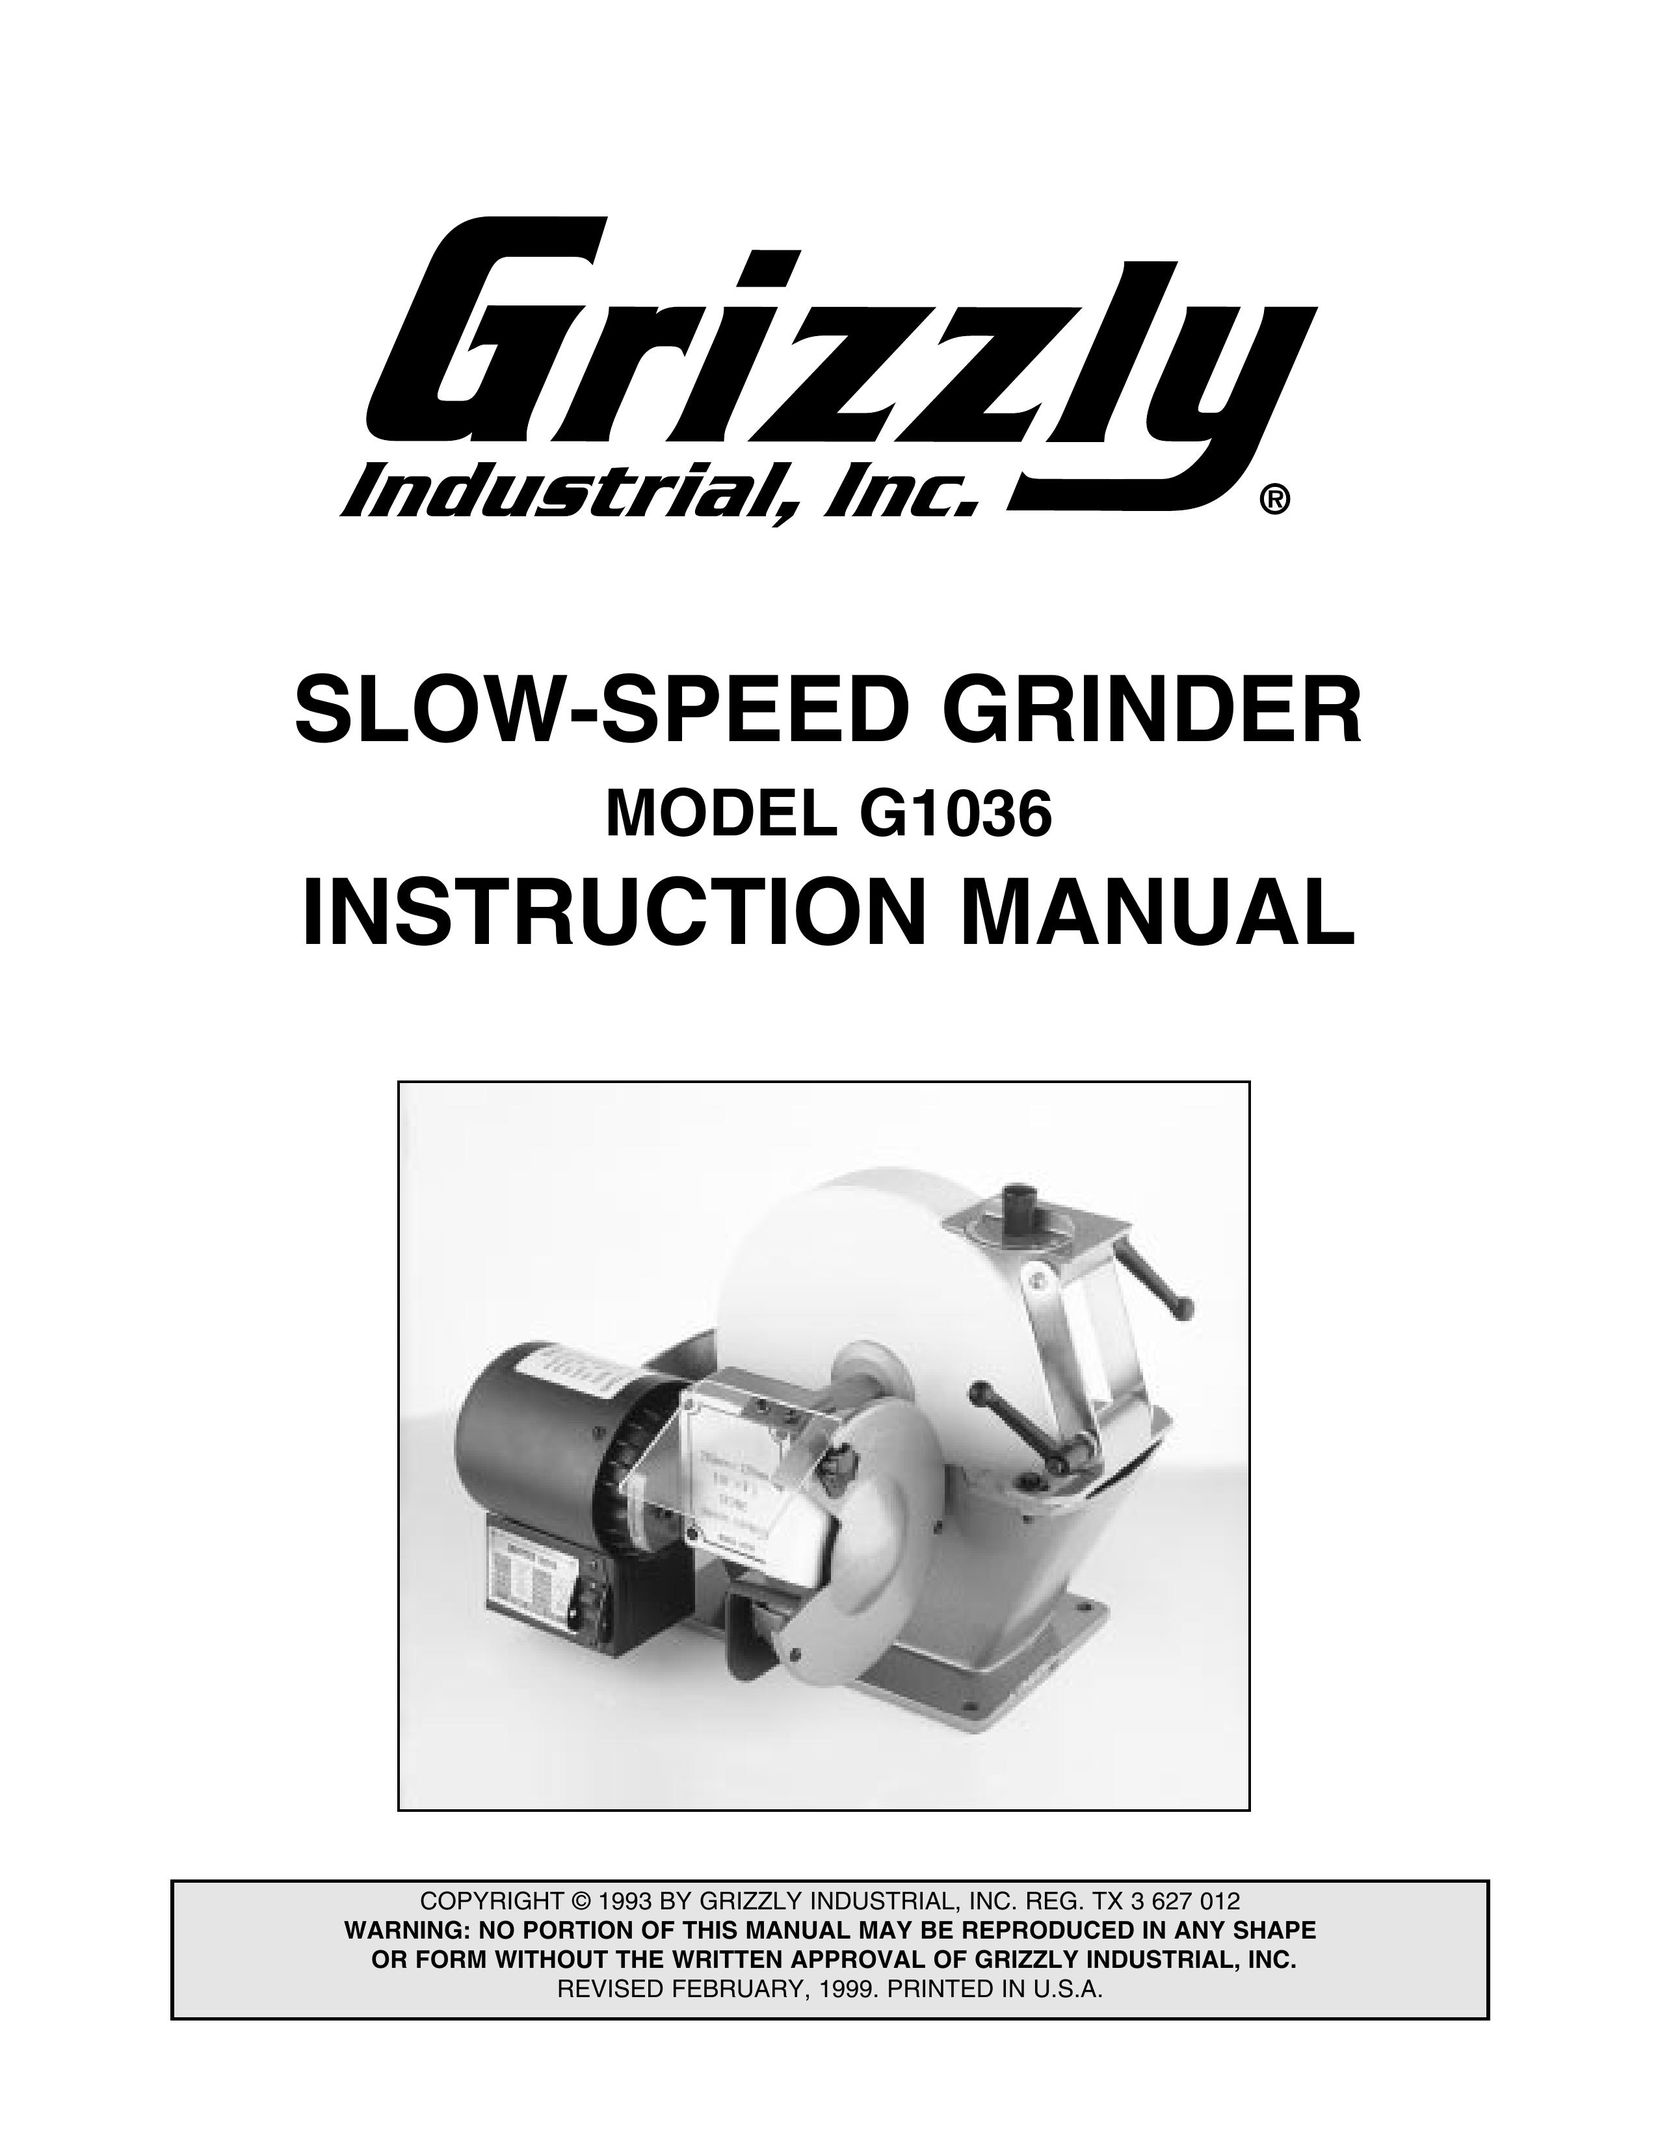 Grizzly G1036 Grinder User Manual